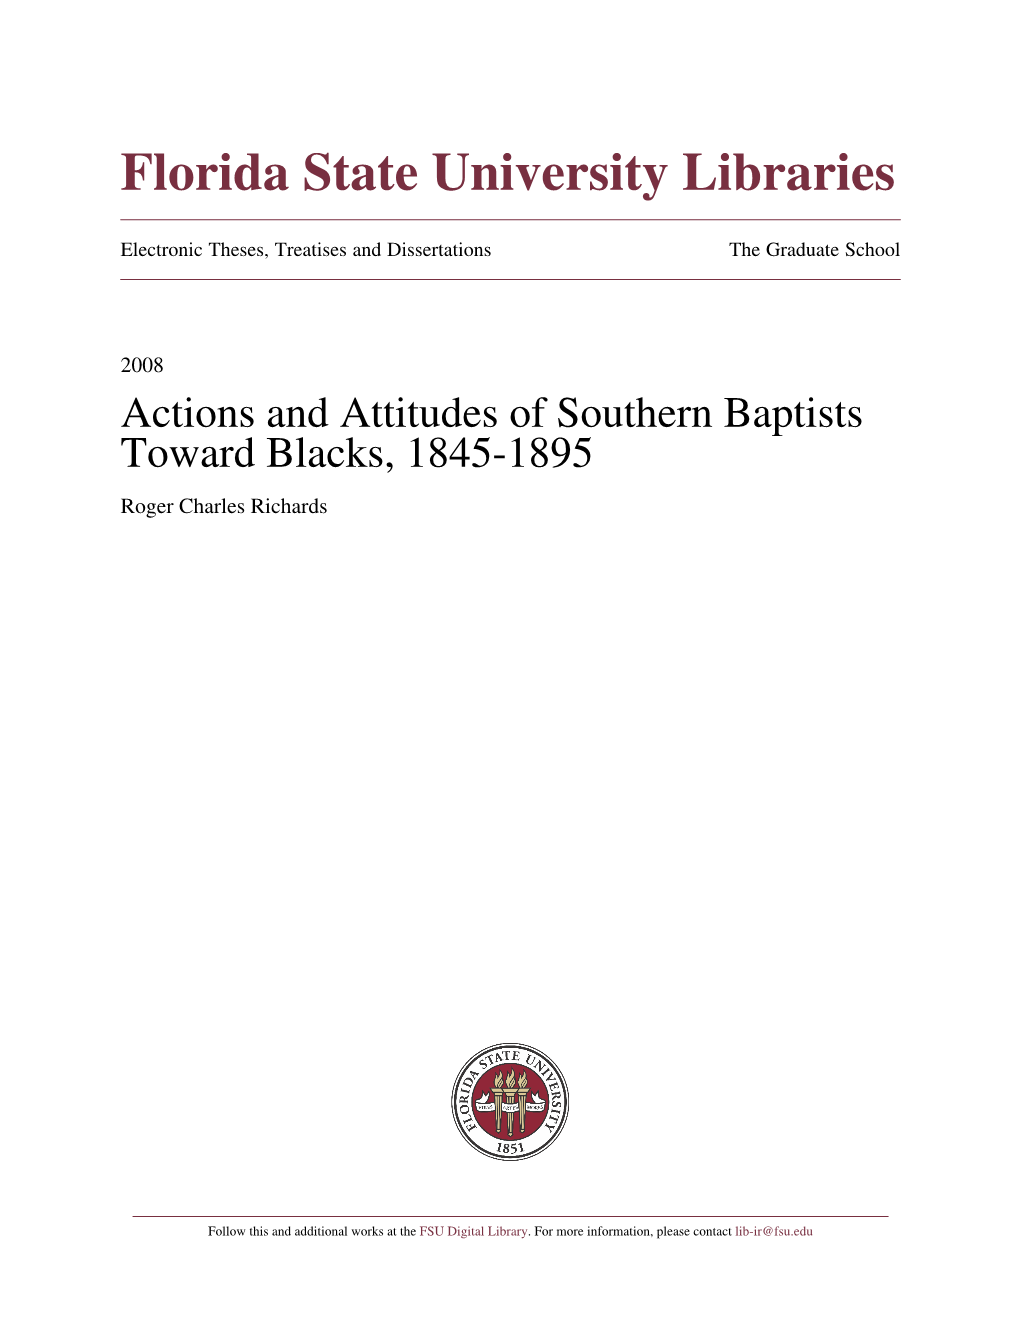 Actions and Attitudes of Southern Baptists Toward Blacks, 1845-1895 Roger Charles Richards